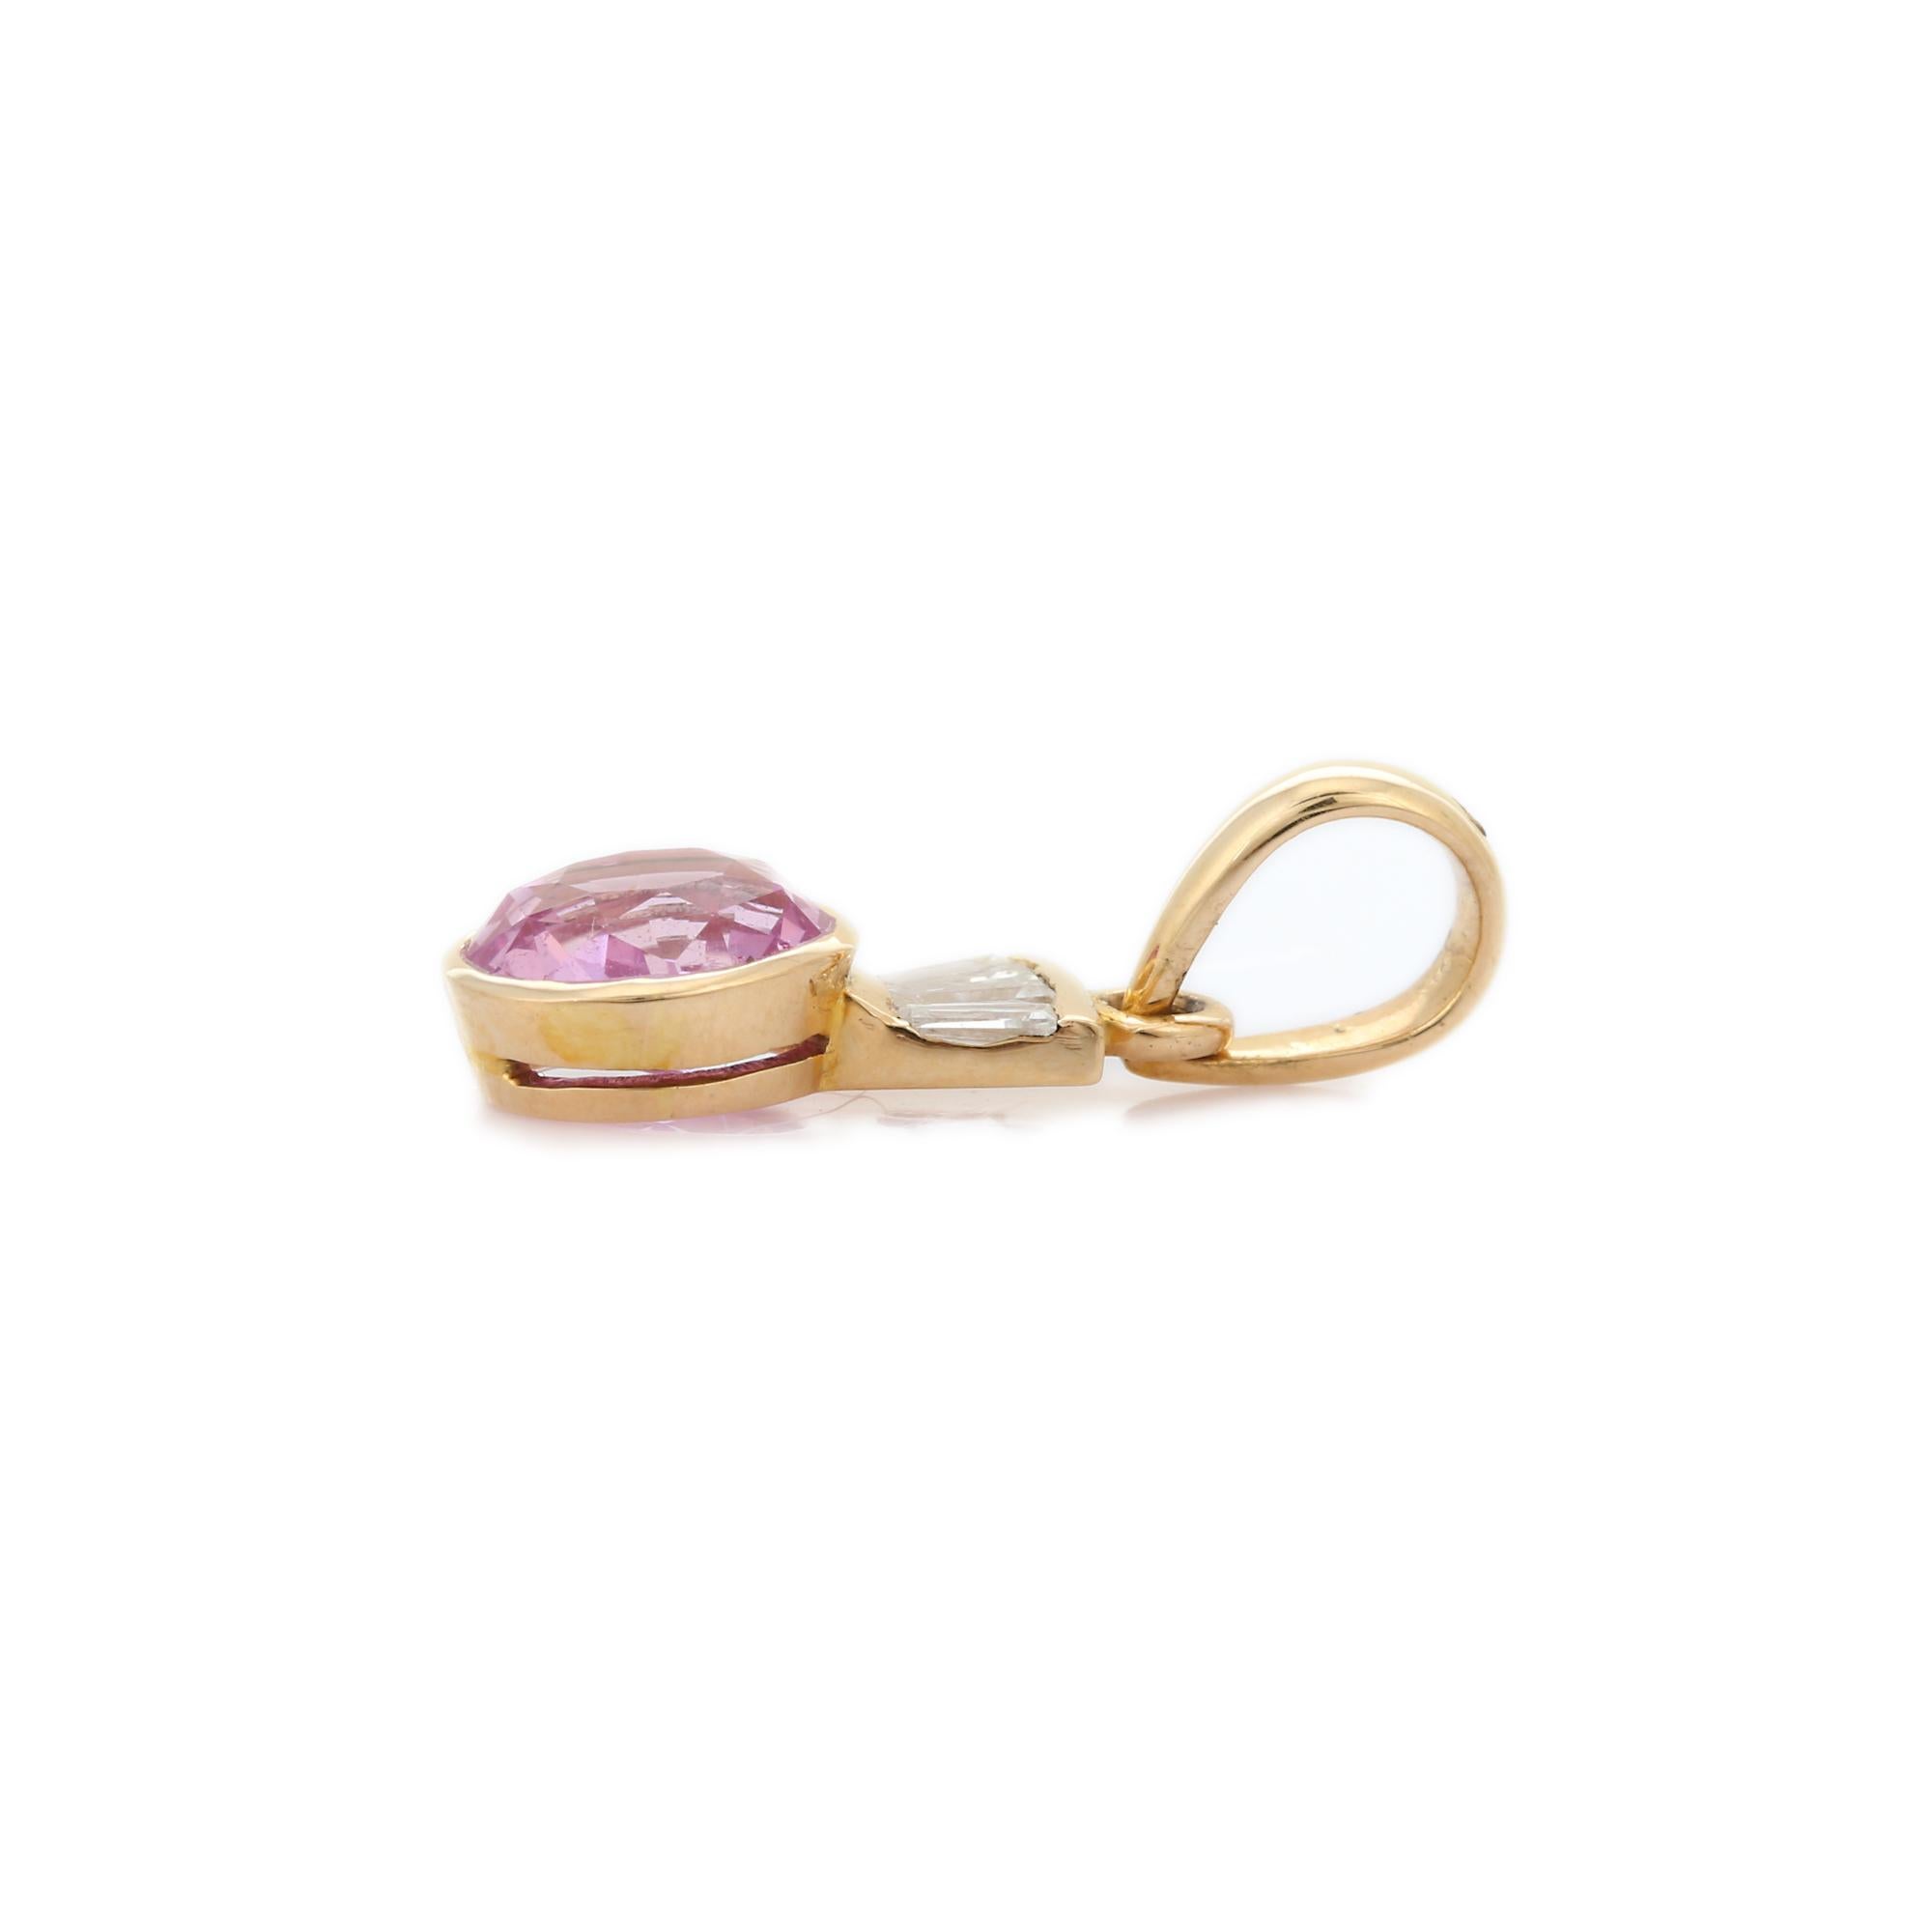 Pink Sapphire pendant in 18K Gold. It has a oval cut sapphire studded with diamonds that completes your look with a decent touch. Pendants are used to wear or gifted to represent love and promises. It's an attractive jewelry piece that goes with